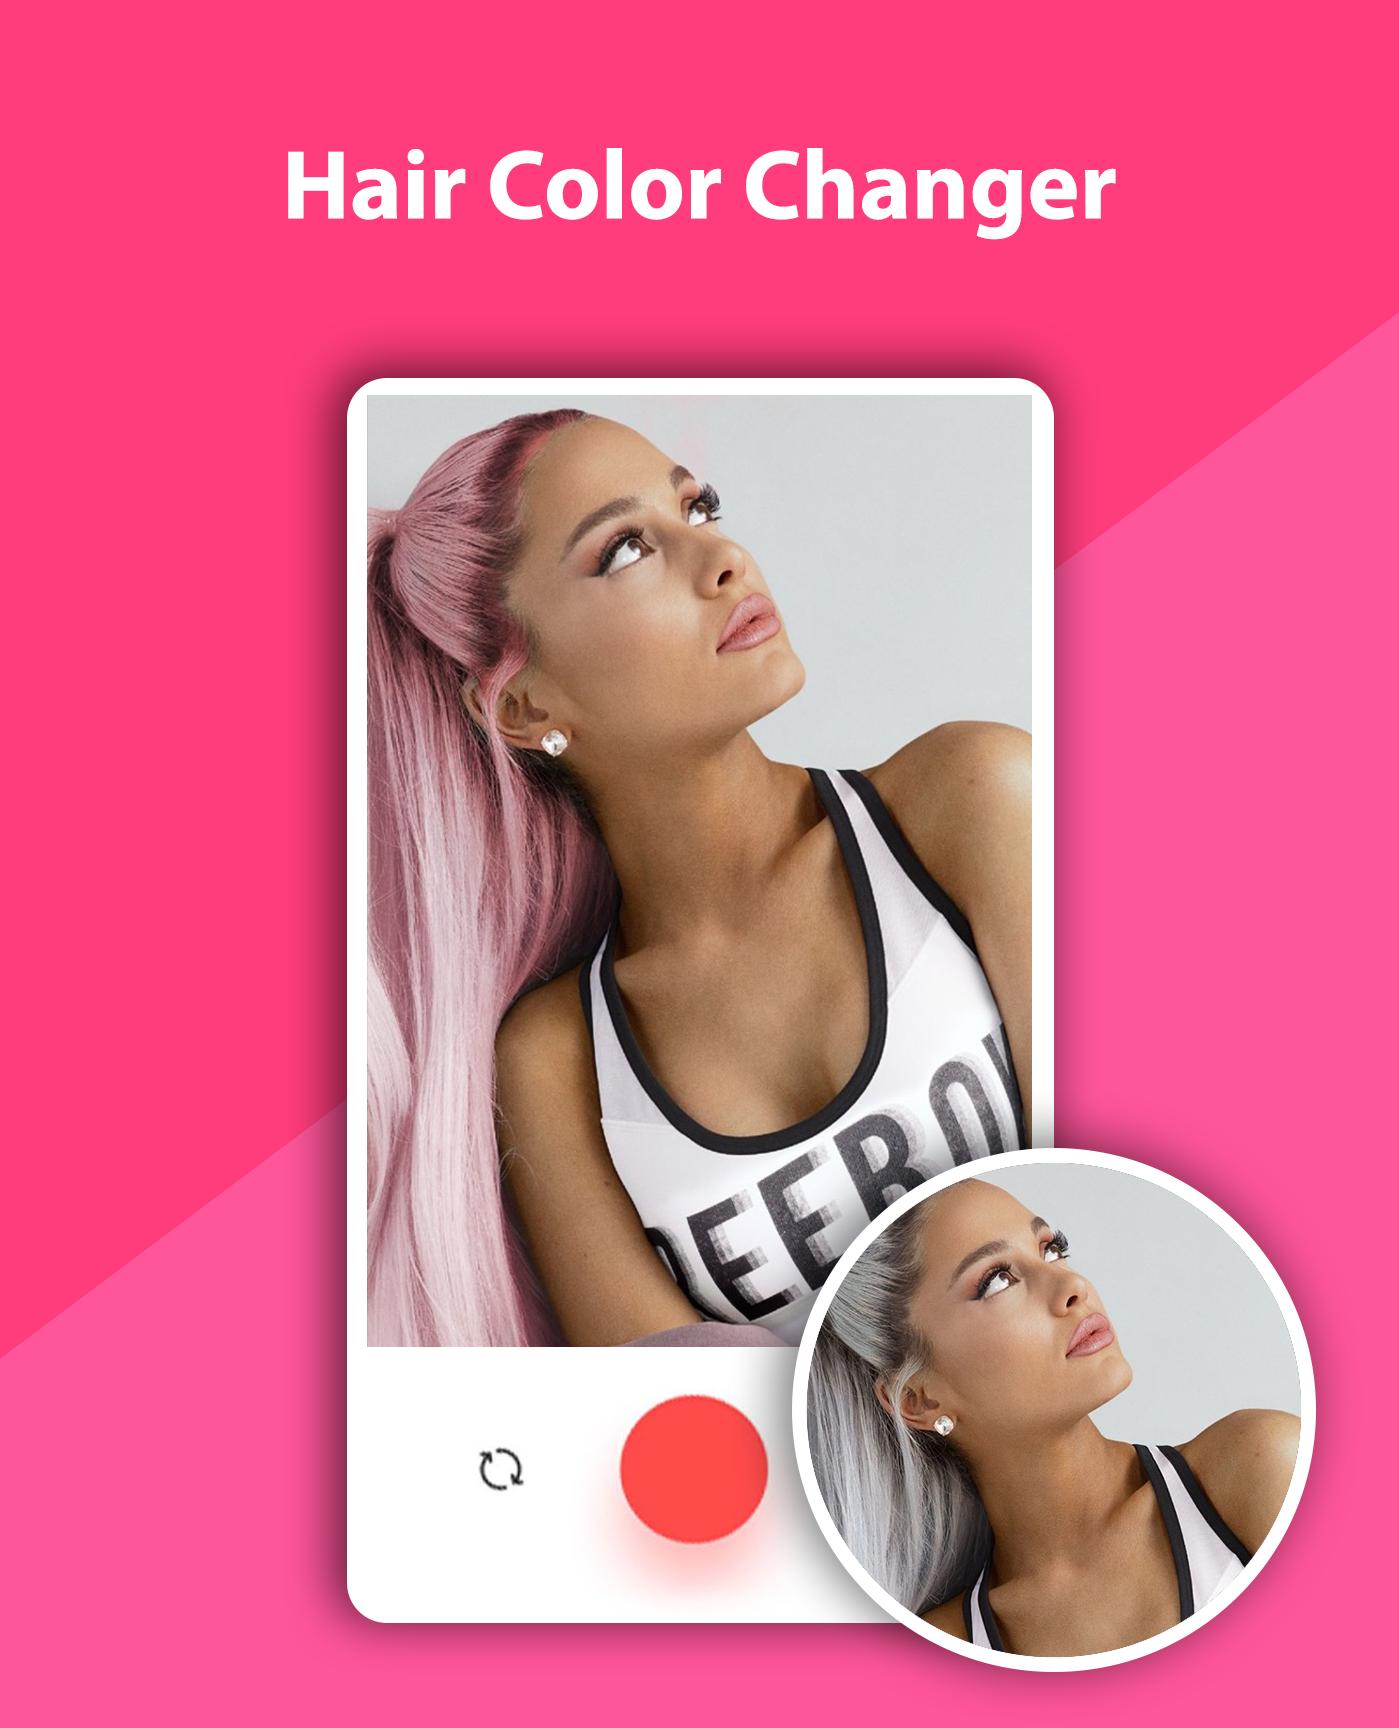 Hair color changer - Try different hair colors 1.0.0 Screenshot 2